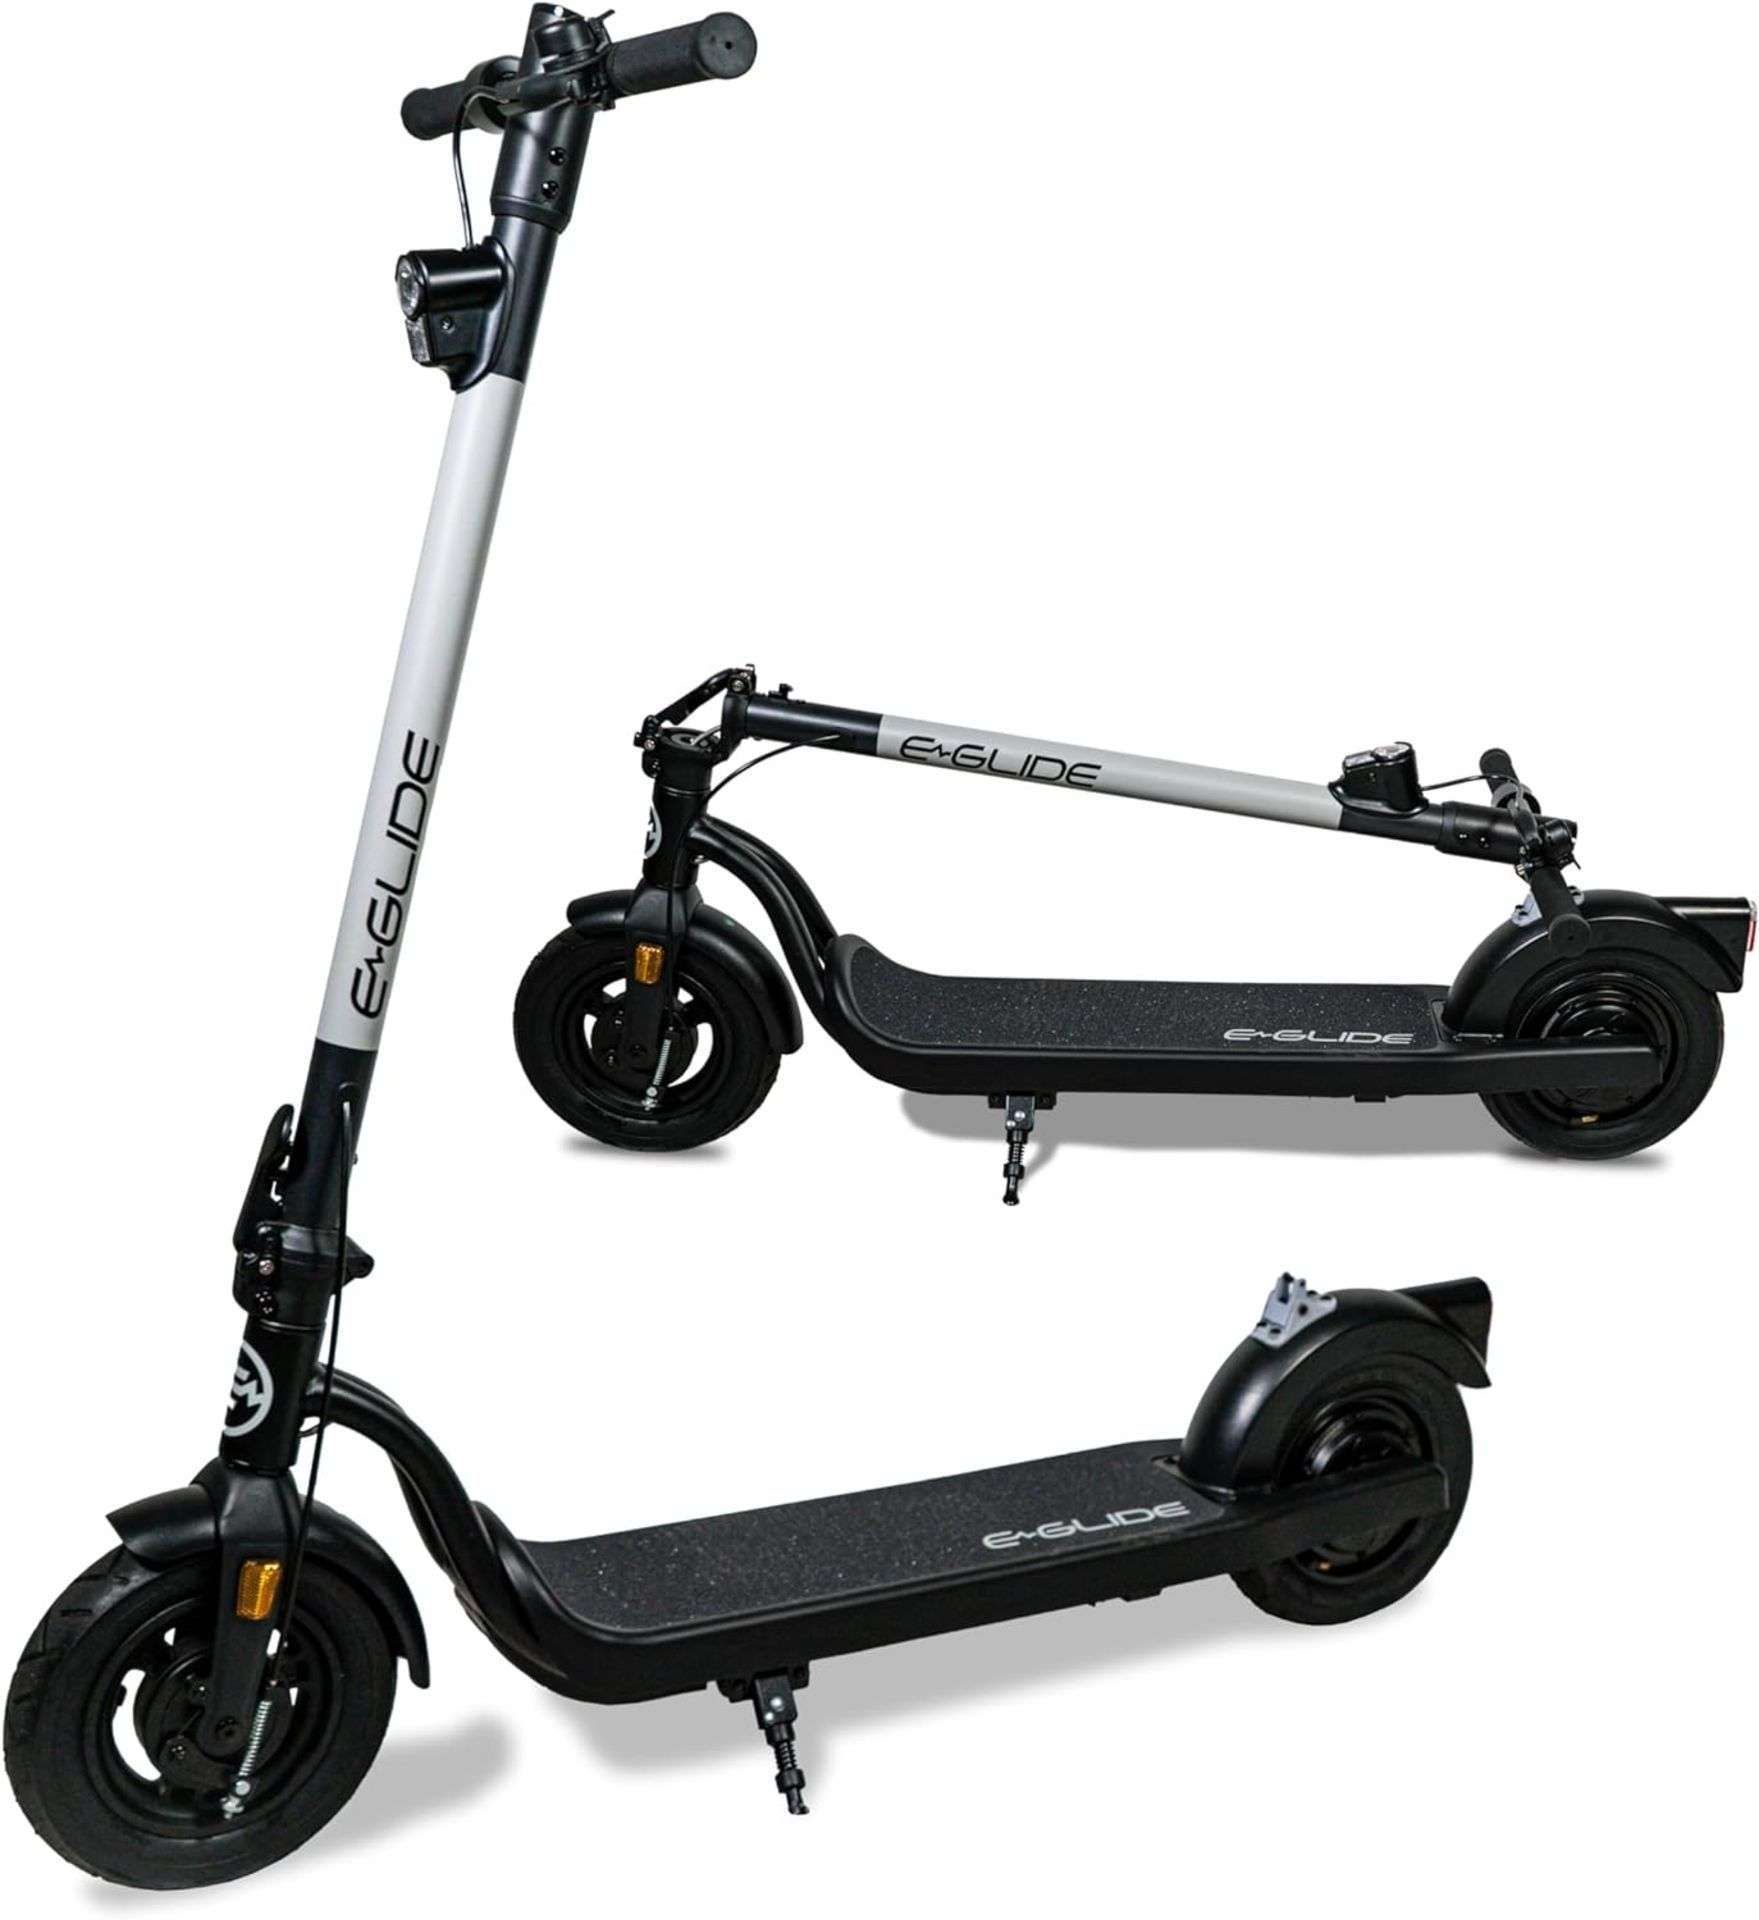 Trade Lot 4 x Brand New E-Glide V2 Electric Scooter Grey and Black RRP £599, Introducing a sleek and